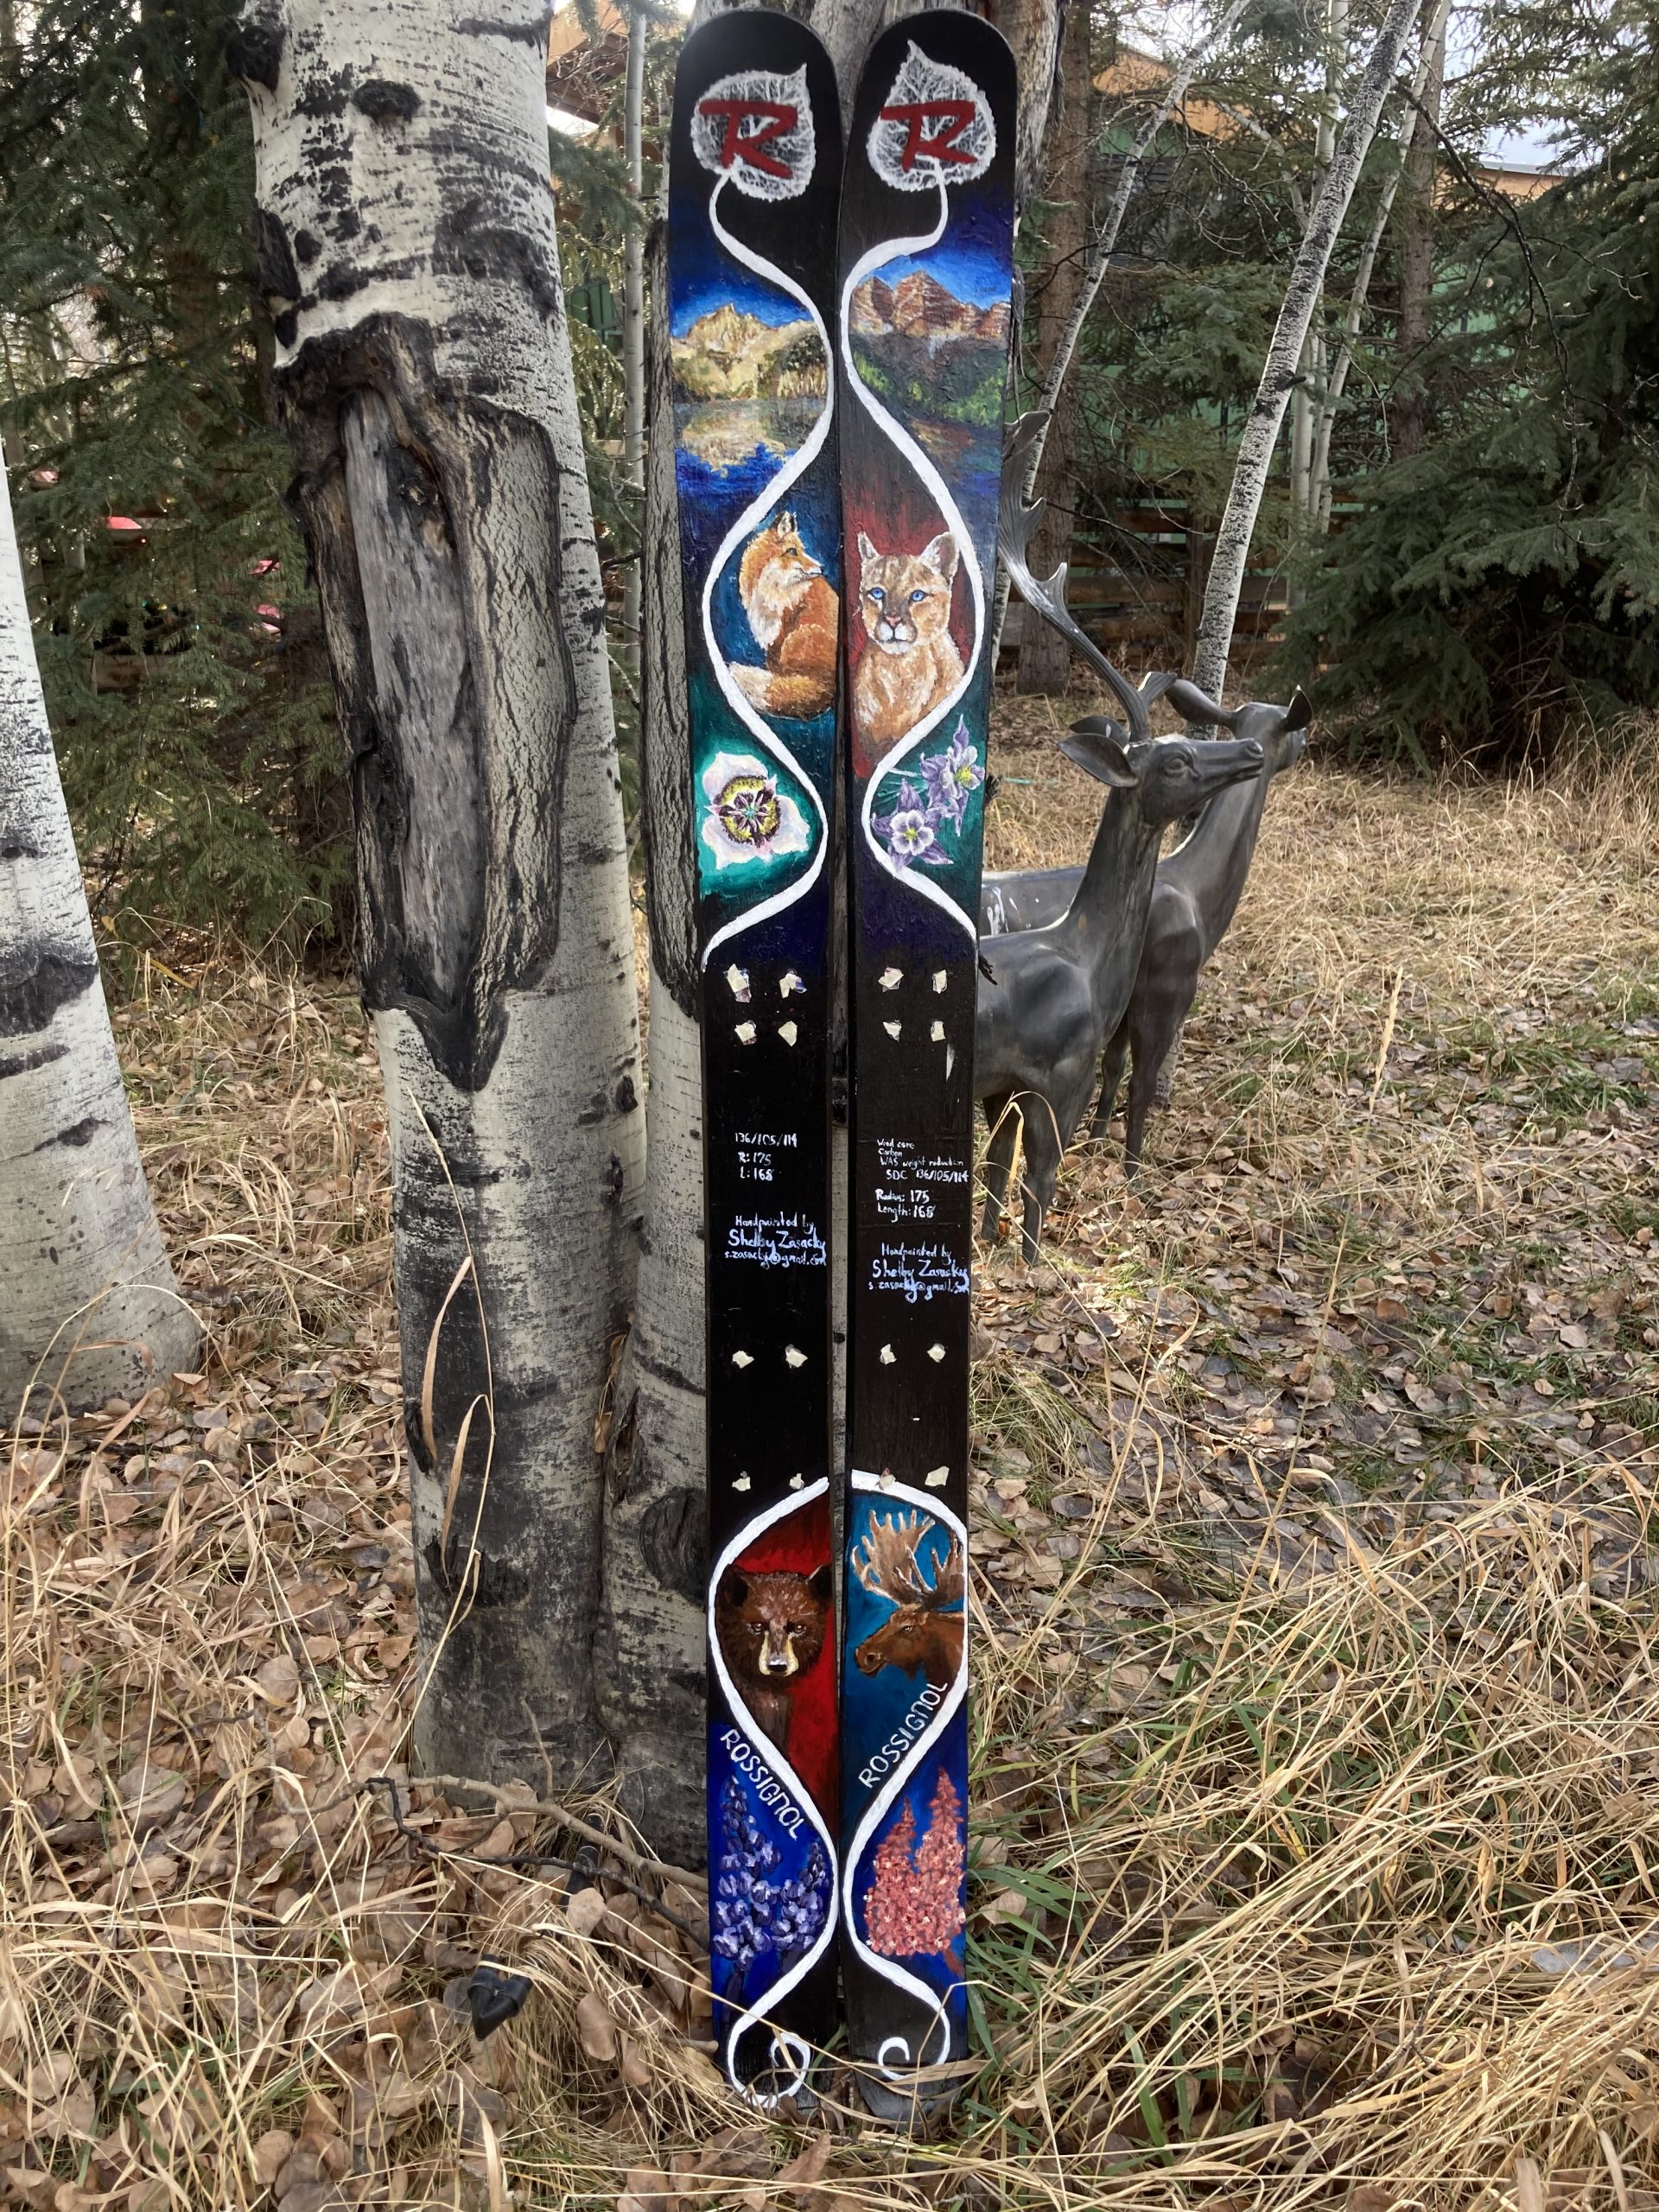 Hand painted skis with images of local flora and fauna